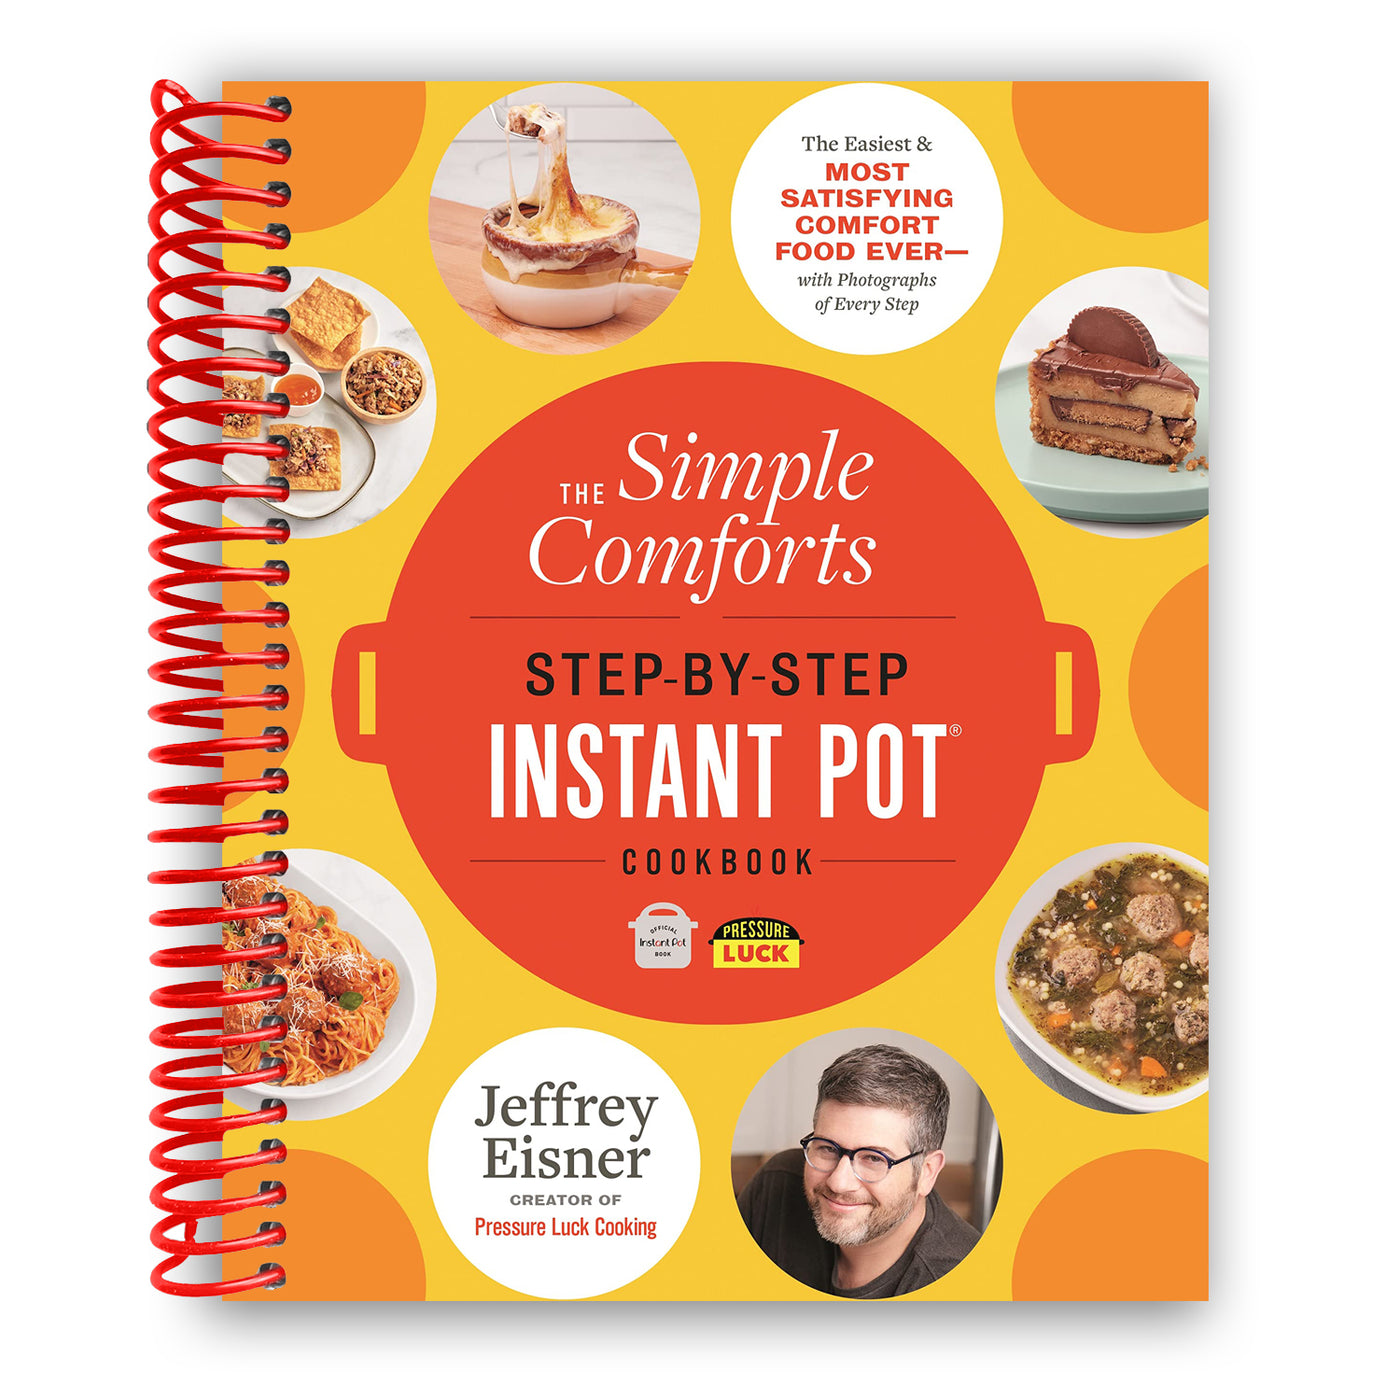 The Lighter Step-By-Step Instant Pot Cookbook: Easy Recipes for a